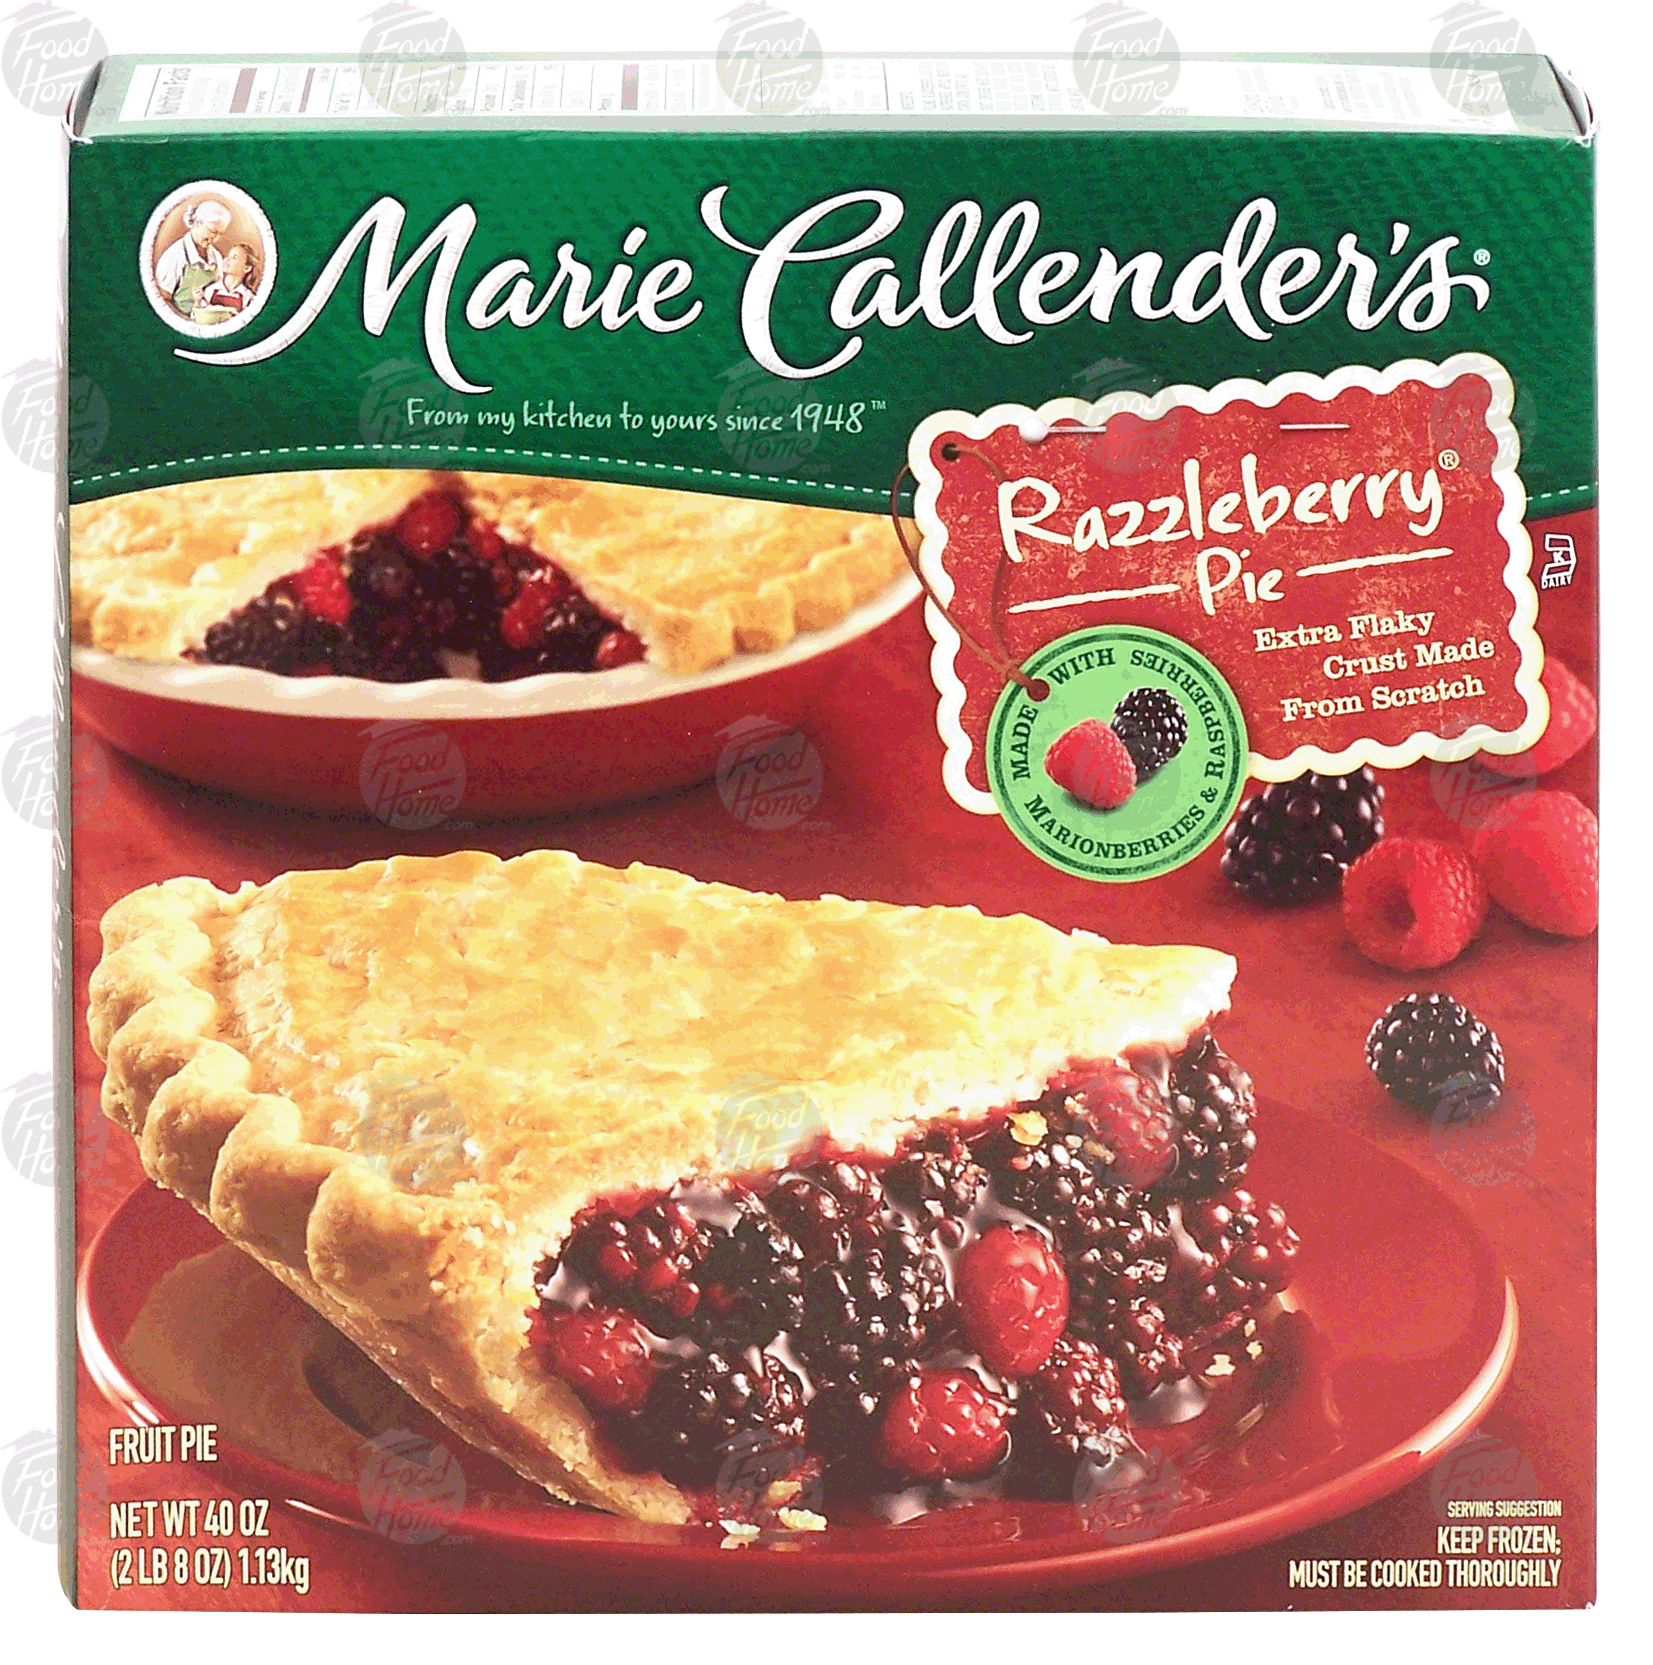 Product Infomation for Marie Callender's